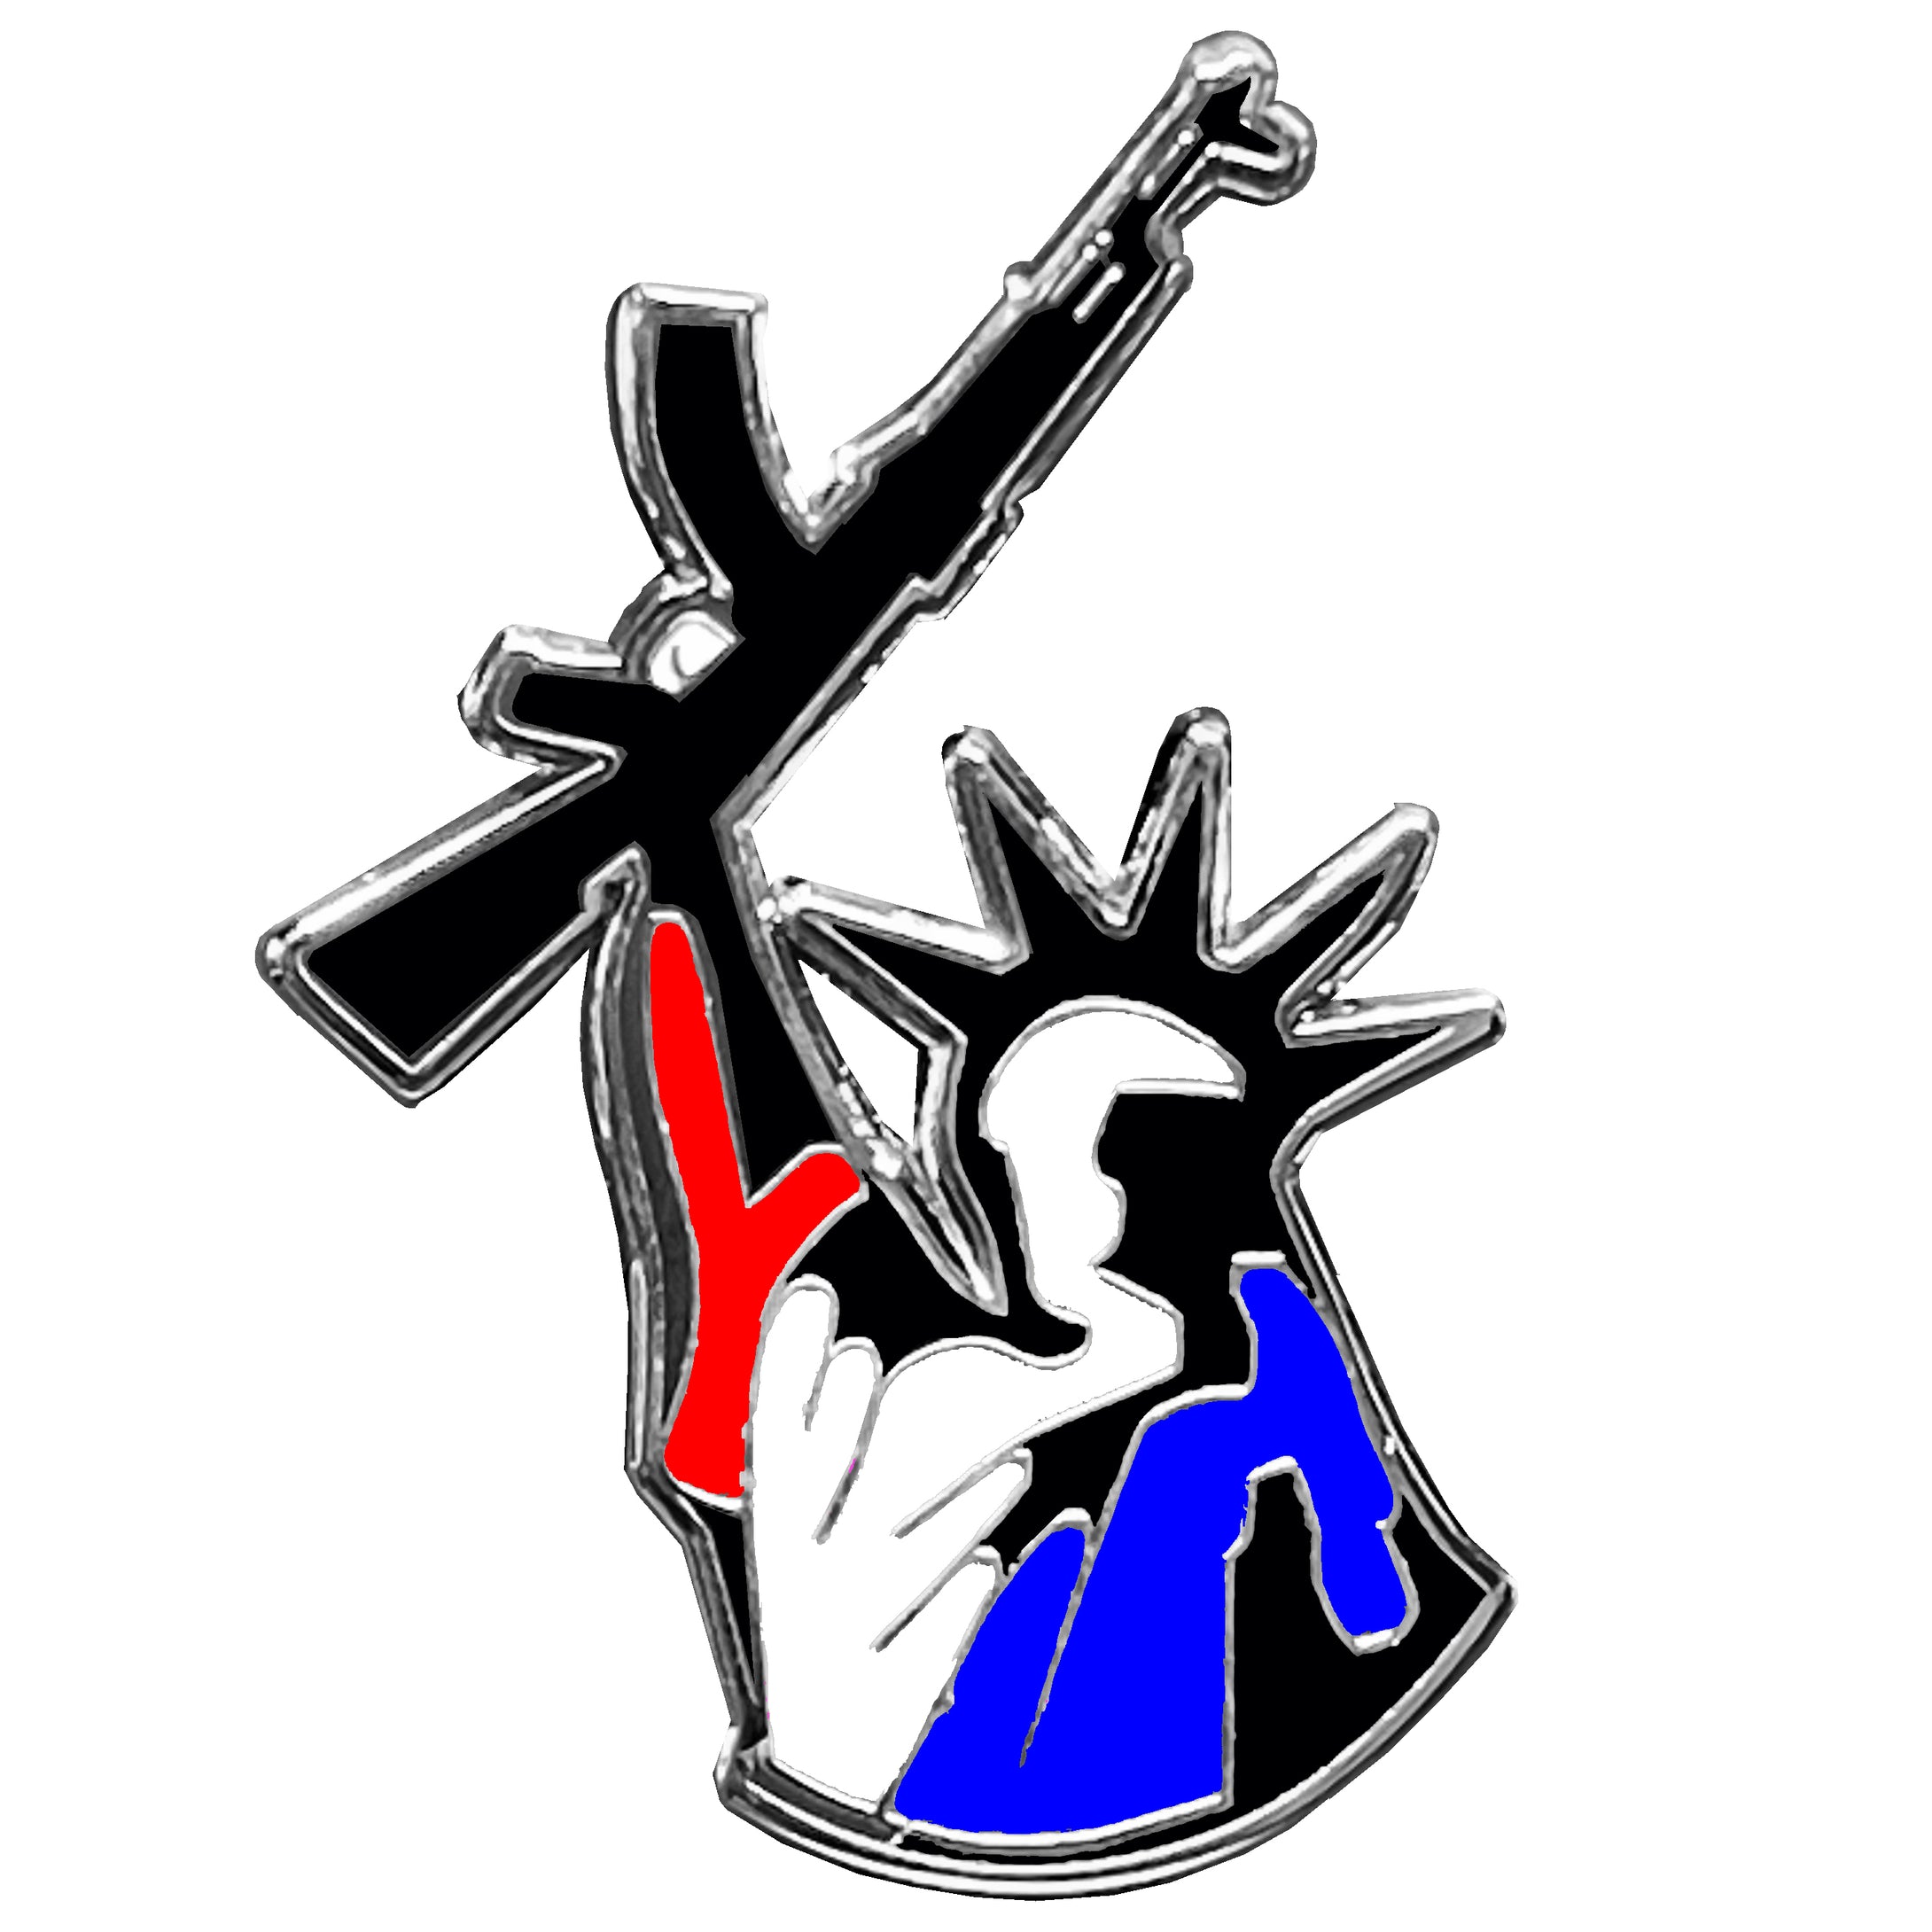 Red, White, and White Cloisonné Statue of Liberty M4 Pin with dual pin posts America 2nd Amendment